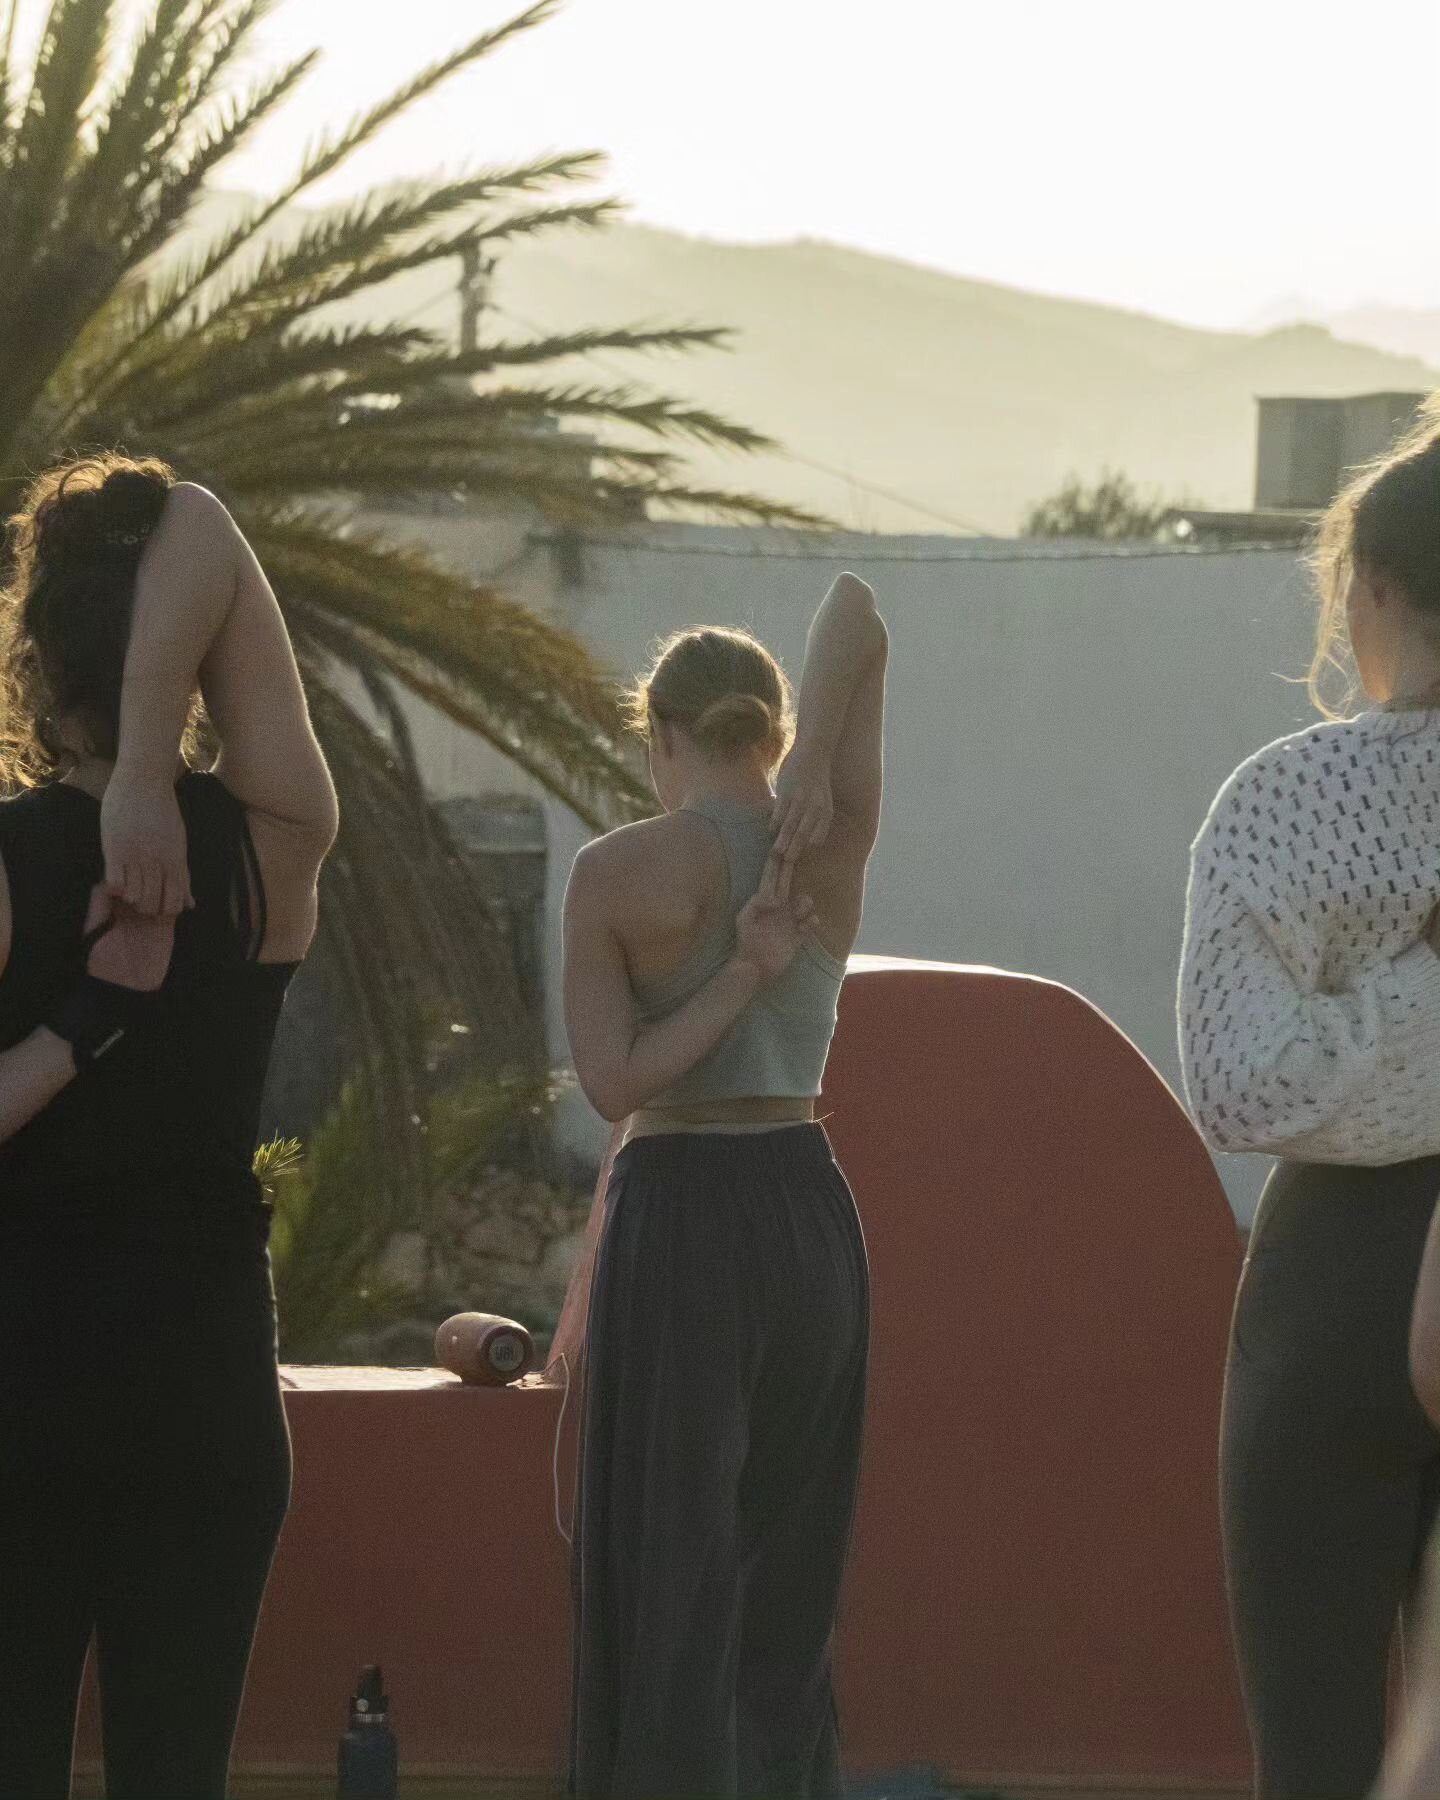 Find tranquility and connection as you practice yoga on a rooftop terrace in Morocco at La Vida Surf, bathed in the serene glow of sunrise. The gentle breeze, panoramic views, and soothing sounds create a harmonious sanctuary for your mind, body, and